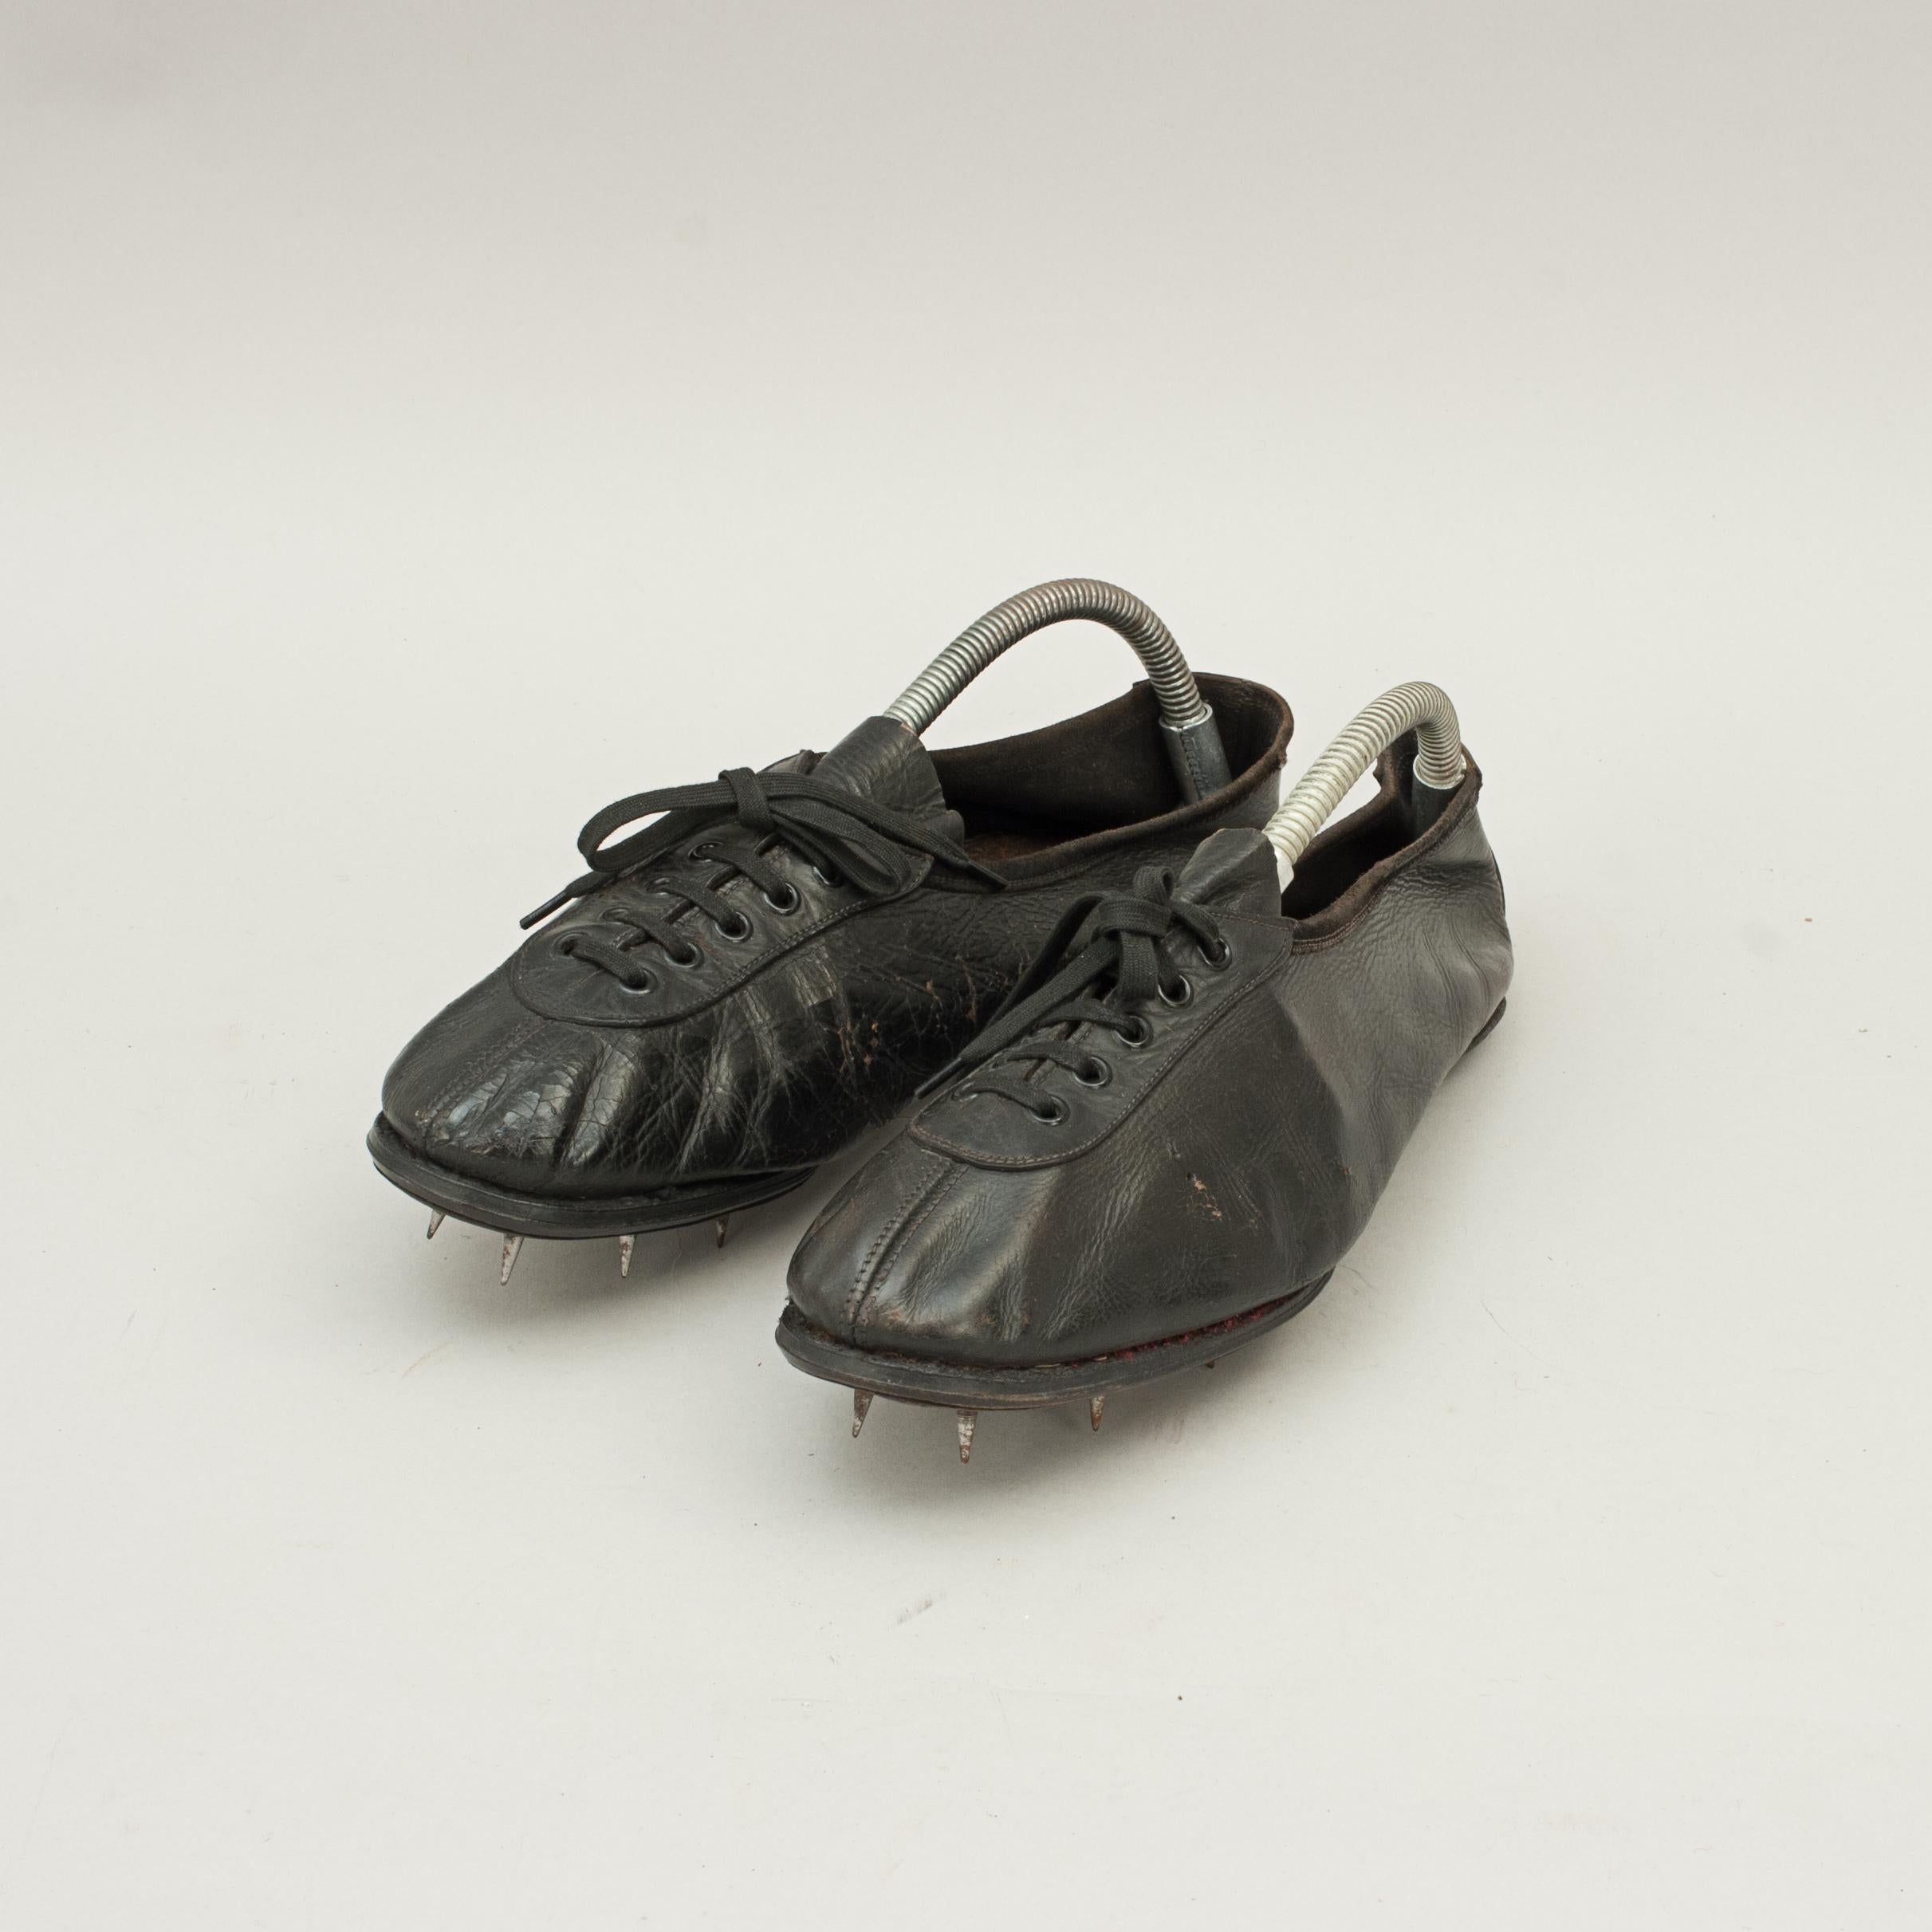 Unknown Pair of Vintage Running Spikes, Athletes Sprinting Shoes